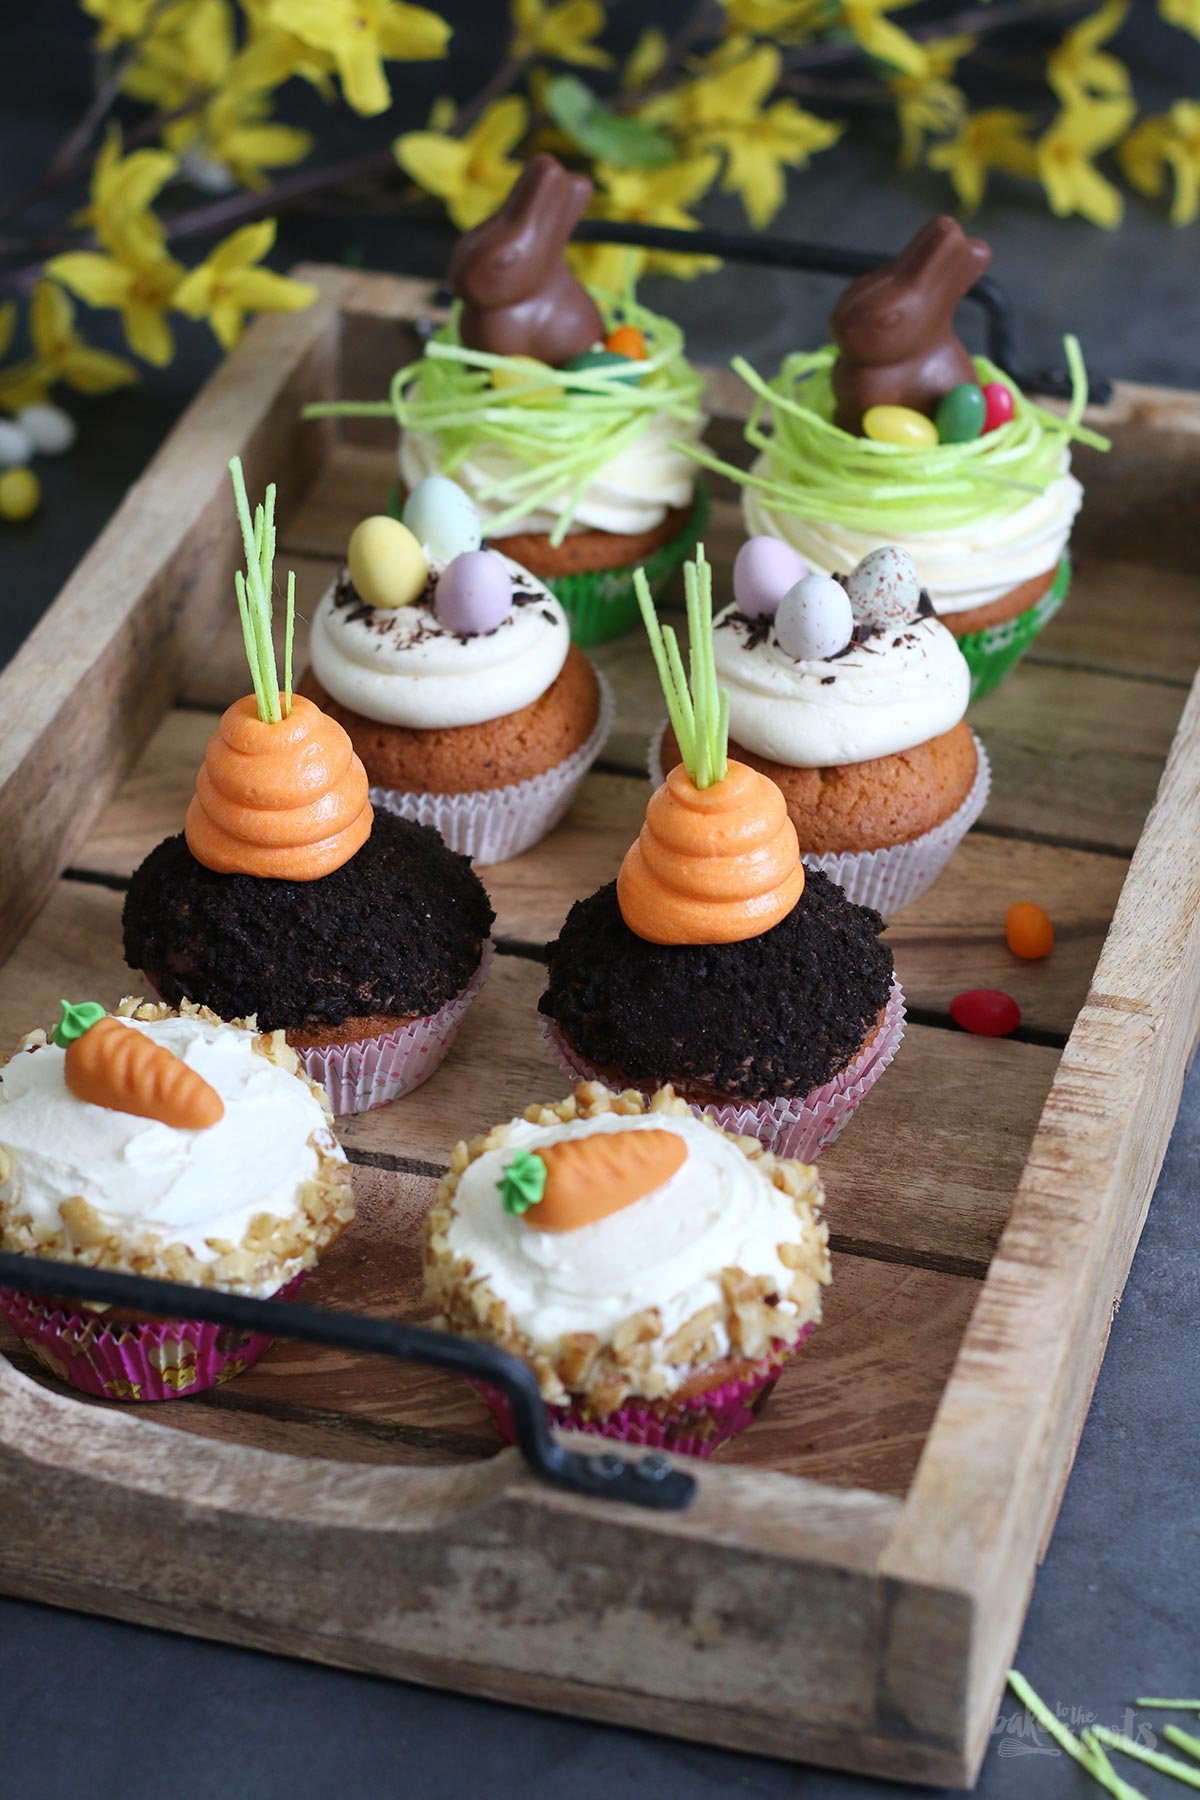 Easter Cupcake Ideas | Bake to the roots